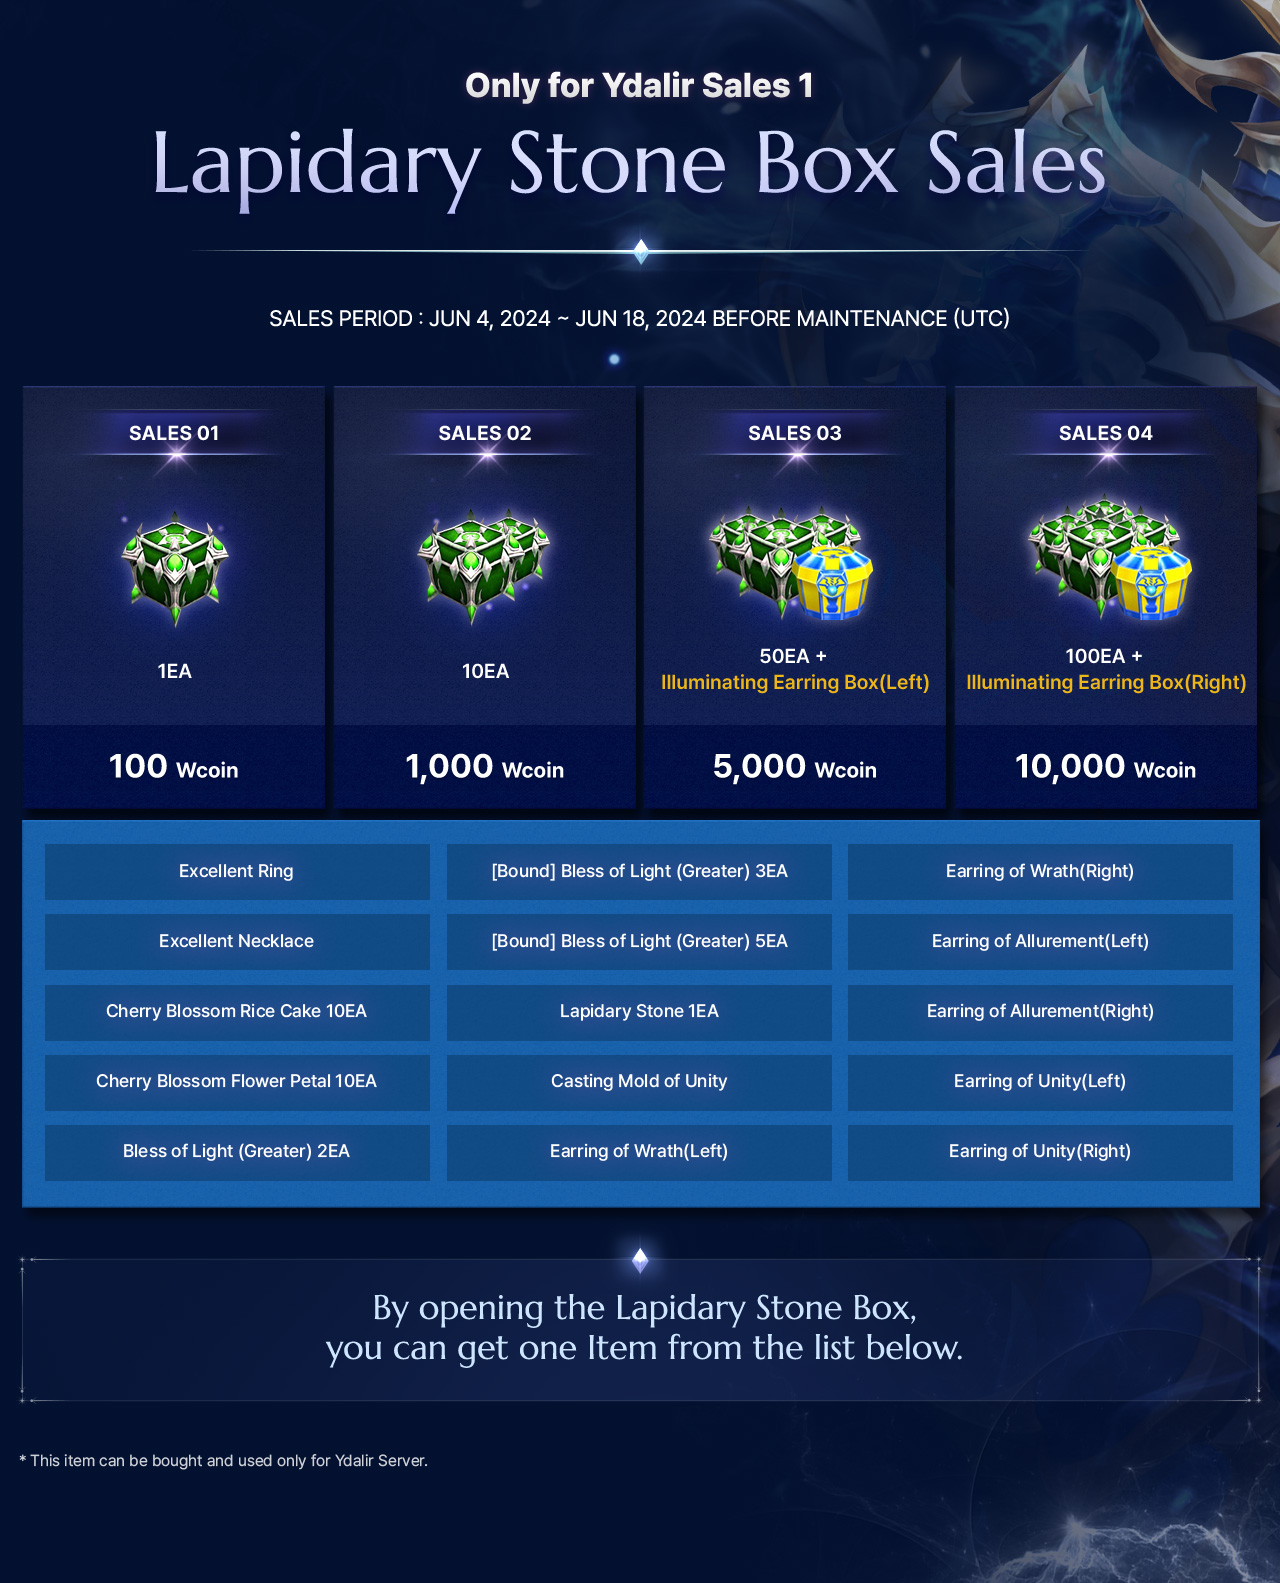 Only for Ydalir Sales 1 Lapidary Stone Box Sales